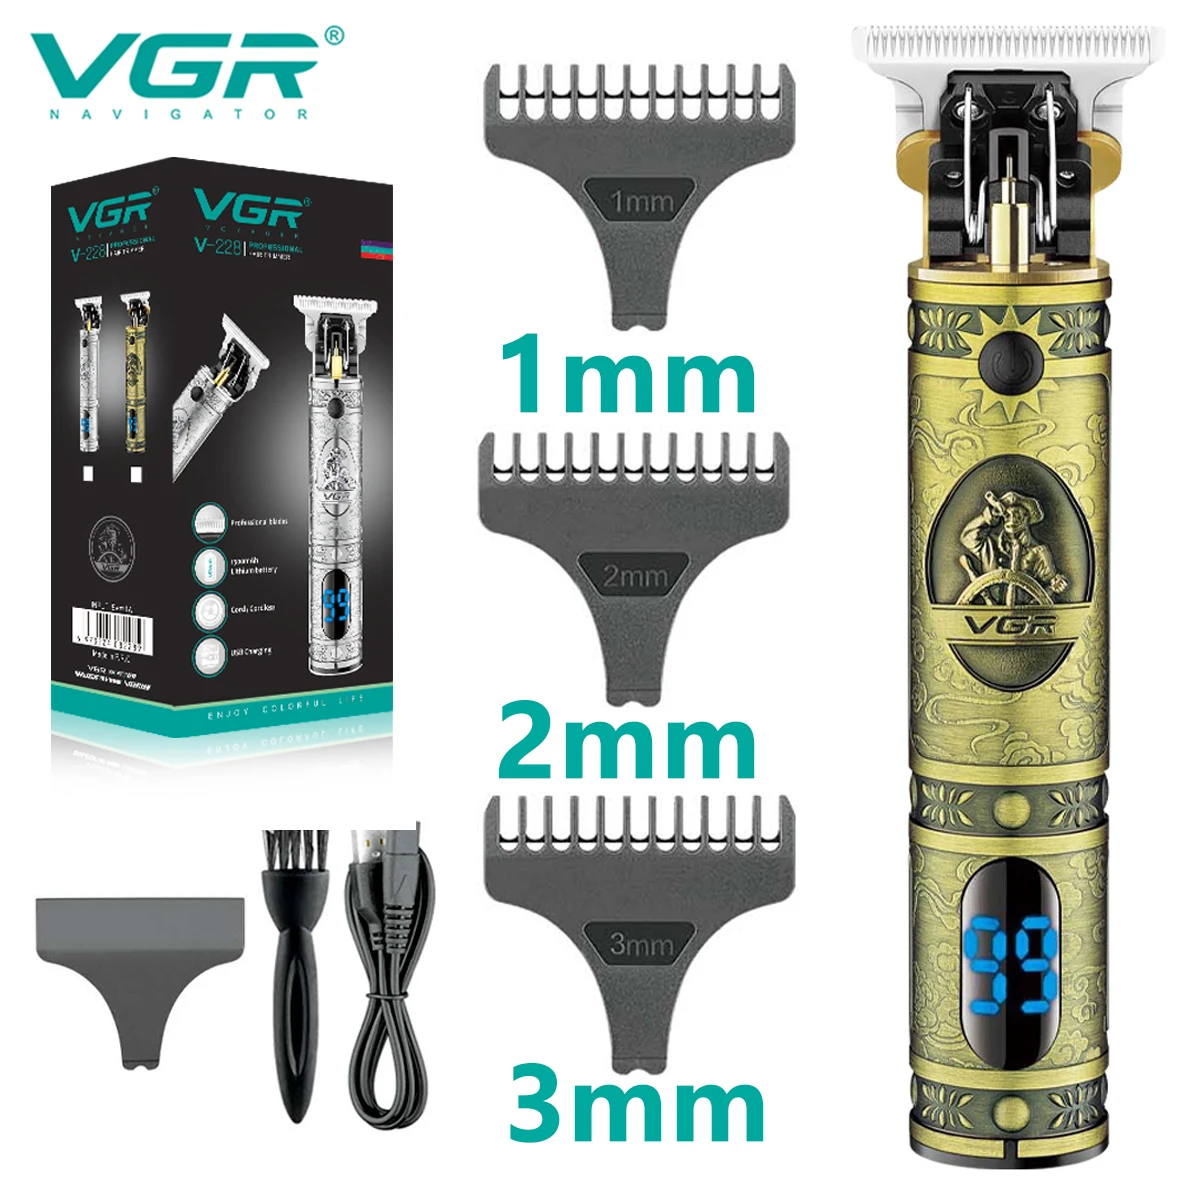 

VGR T9 Hair Clipper Metal Hair Cutting Machine Professional Barber Cordless Electric Trimmer Rechargeable Trimmer for Men V-228